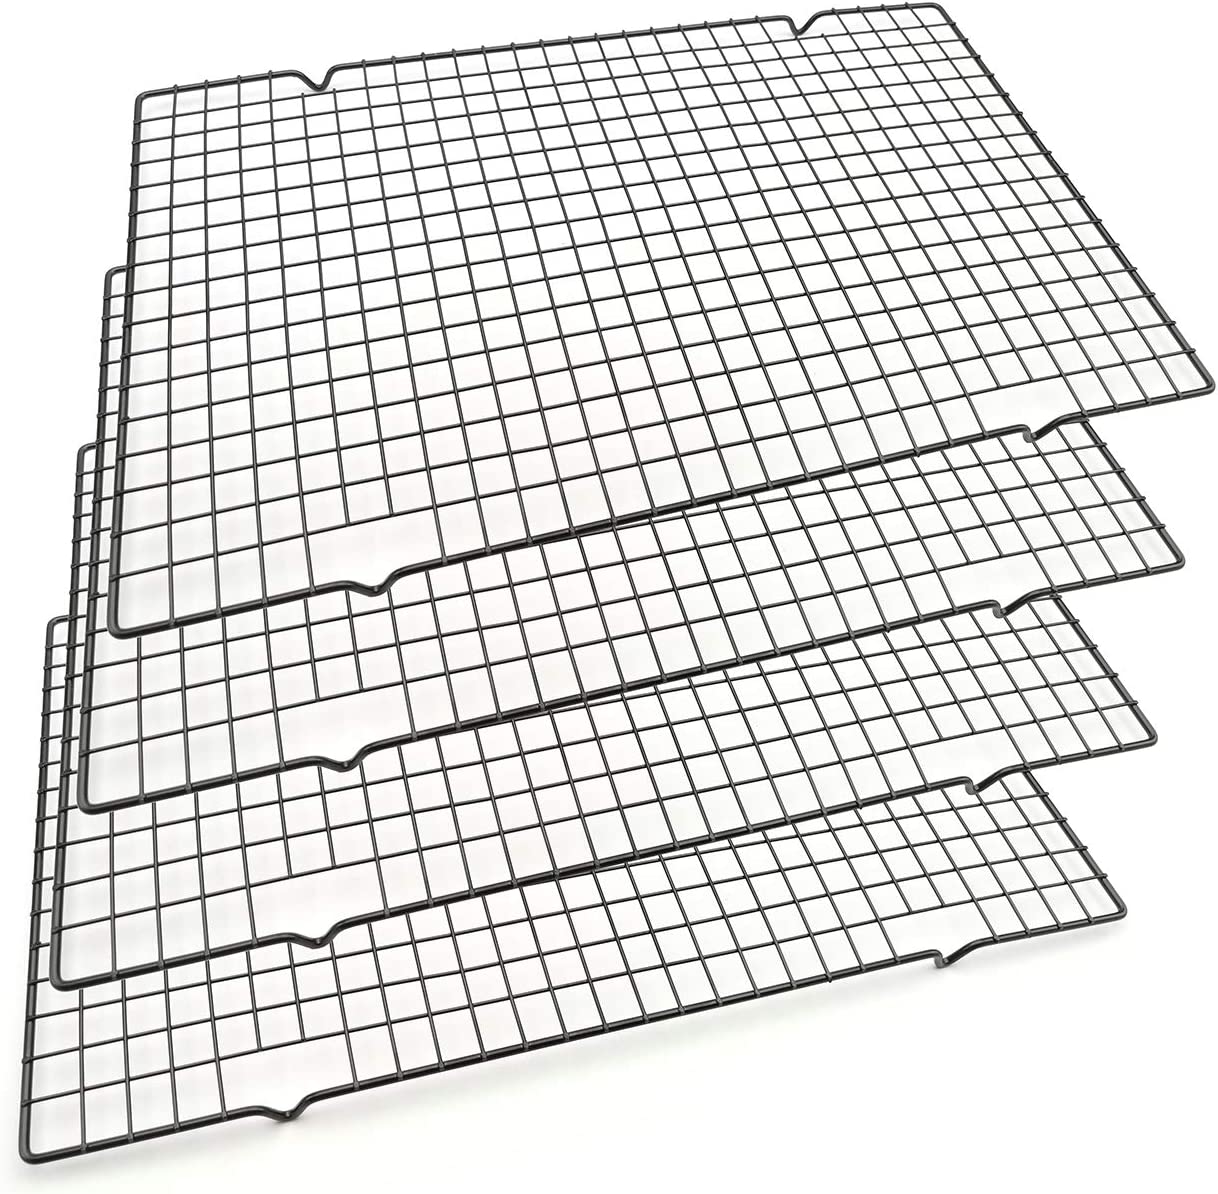  Nordic Ware 43343 Oven Safe Nonstick Baking & Cooling Grid (1/2  Sheet), One Size, Steel: Home & Kitchen